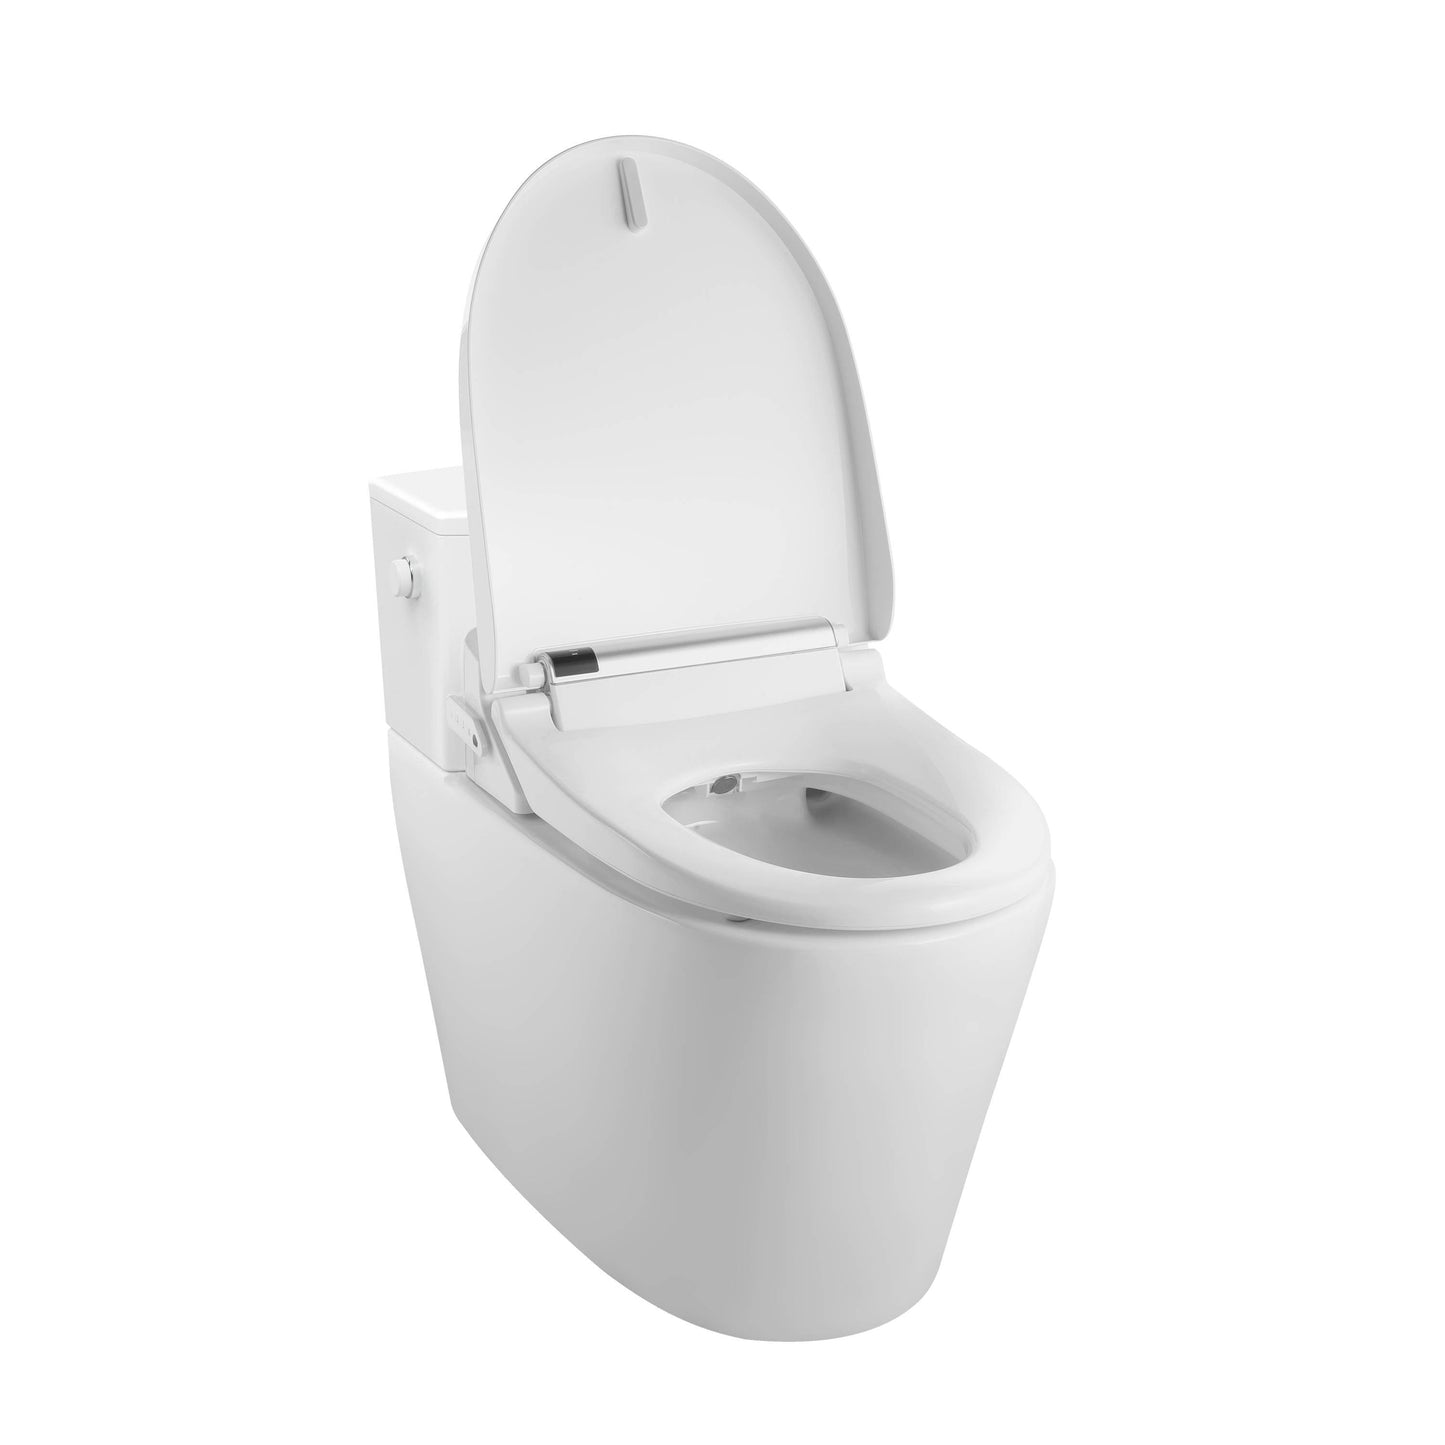 VOVO Electronic Bidet VB-4000S, Made in Korea, LED Nightlight, Deodorization, Full Stainless Nozzle,Heated Seat,Warm Dry and Water - YOURISHOP.COM